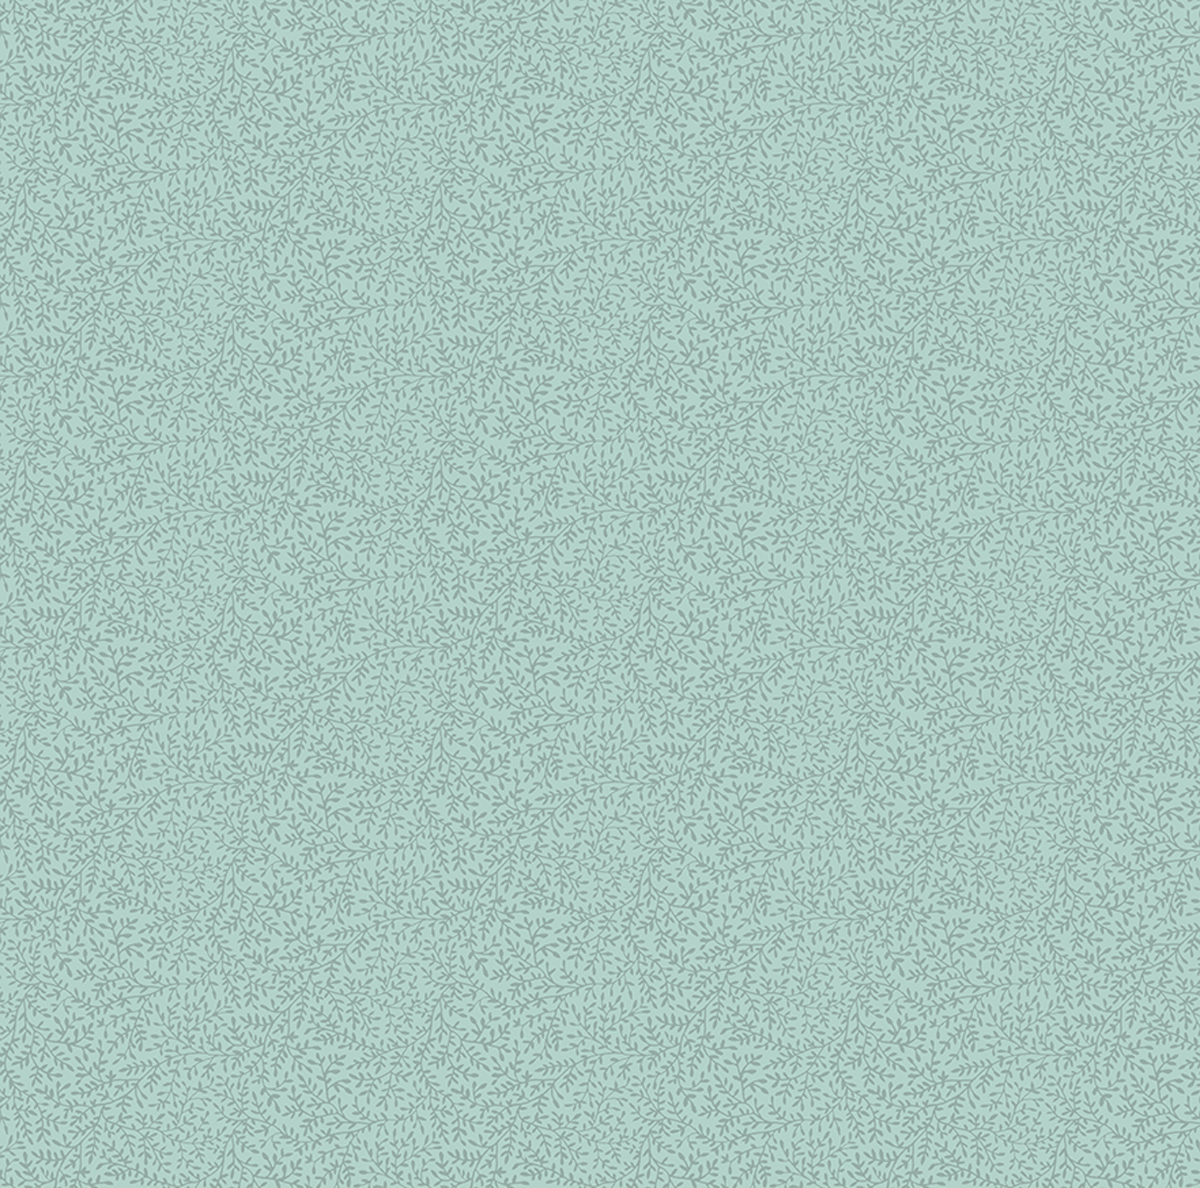 a light blue background with small white dots.